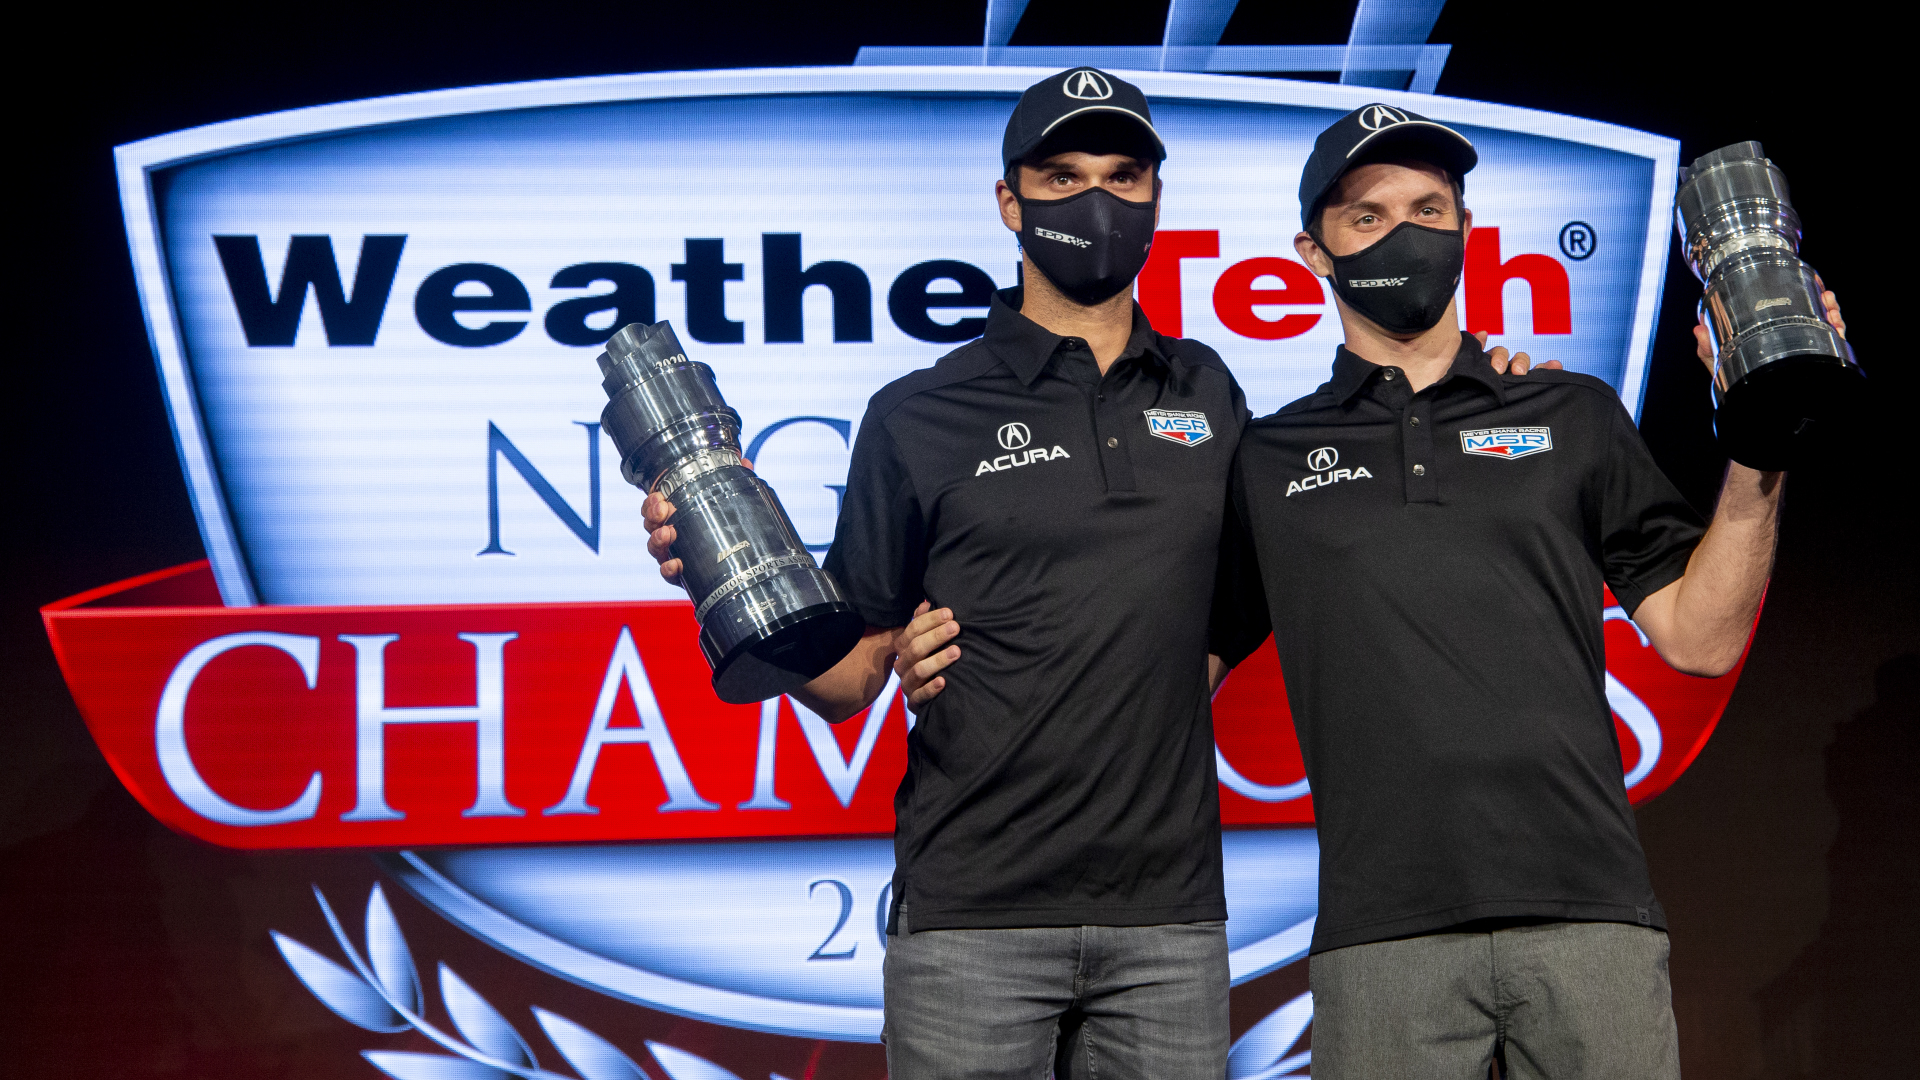 Farnbacher and Meyer Shank Racing celebrate second title